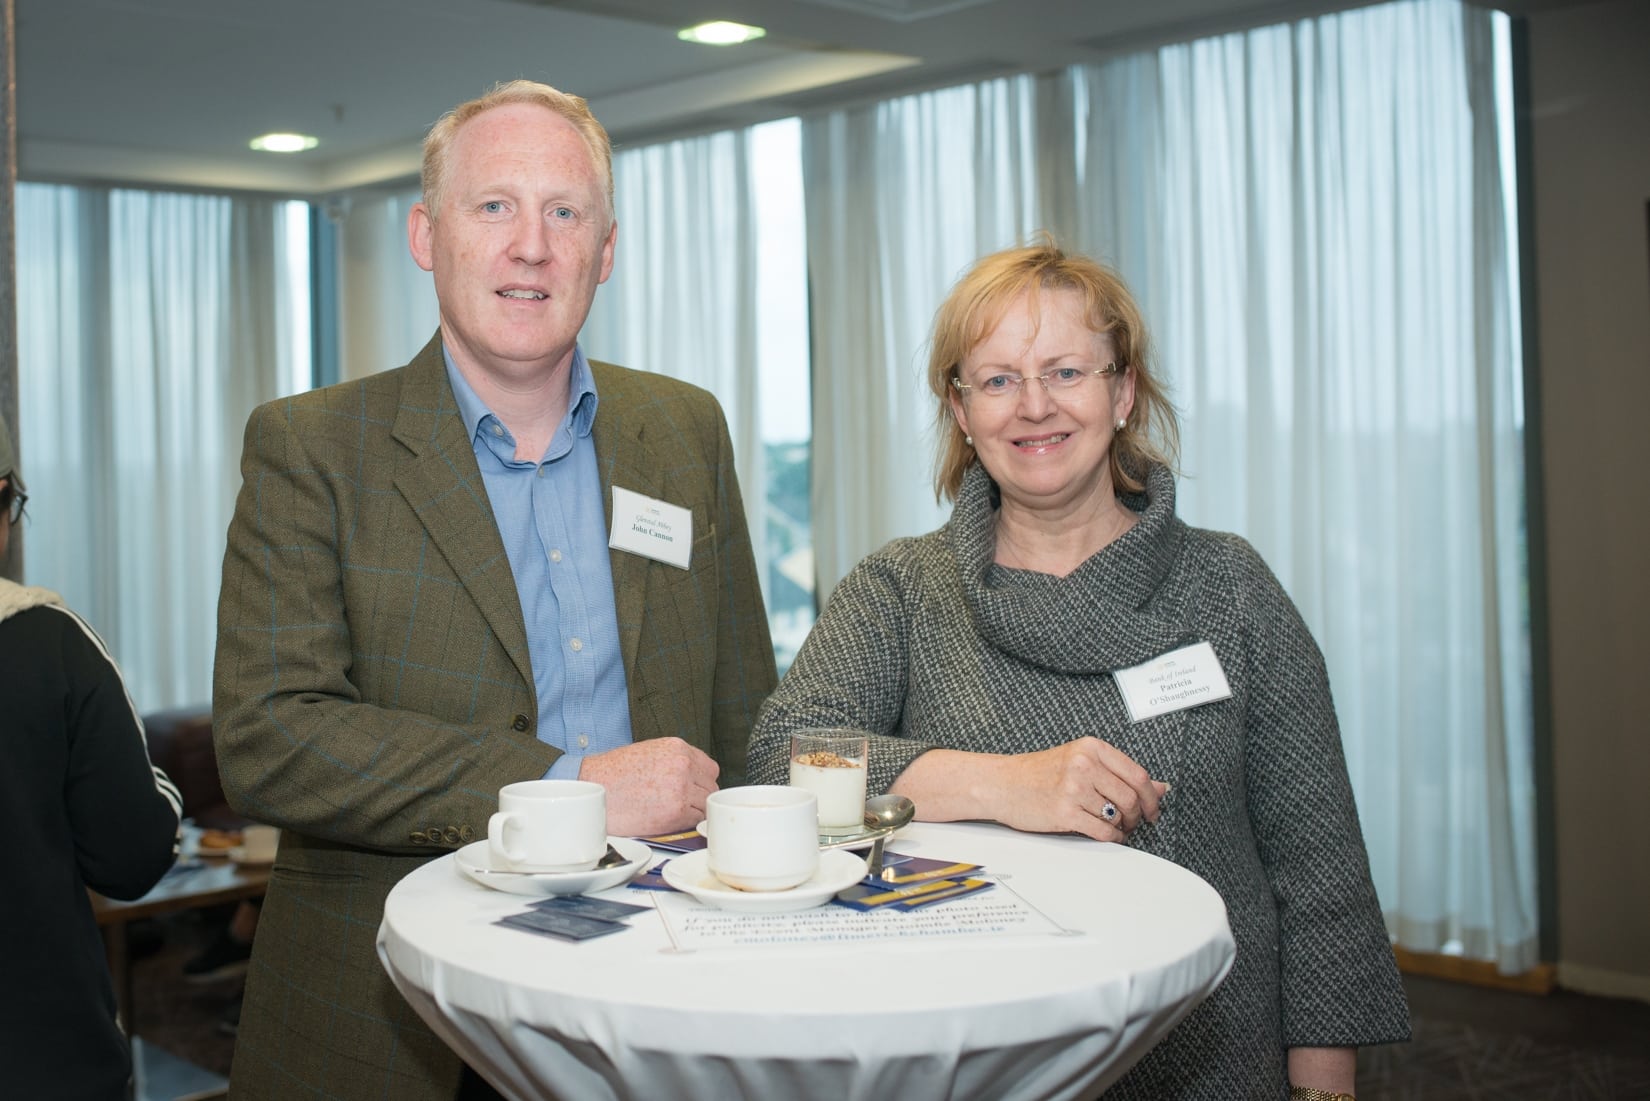 No repro fee-Business Excellence Seminar: Wealth Management. Event sponsored by AIB- 11-09-2018, From Left to Right: John Cannon - Glenstal Abbey, Patricia O'Shaughnessy - BOI 
Photo credit Shauna Kennedy